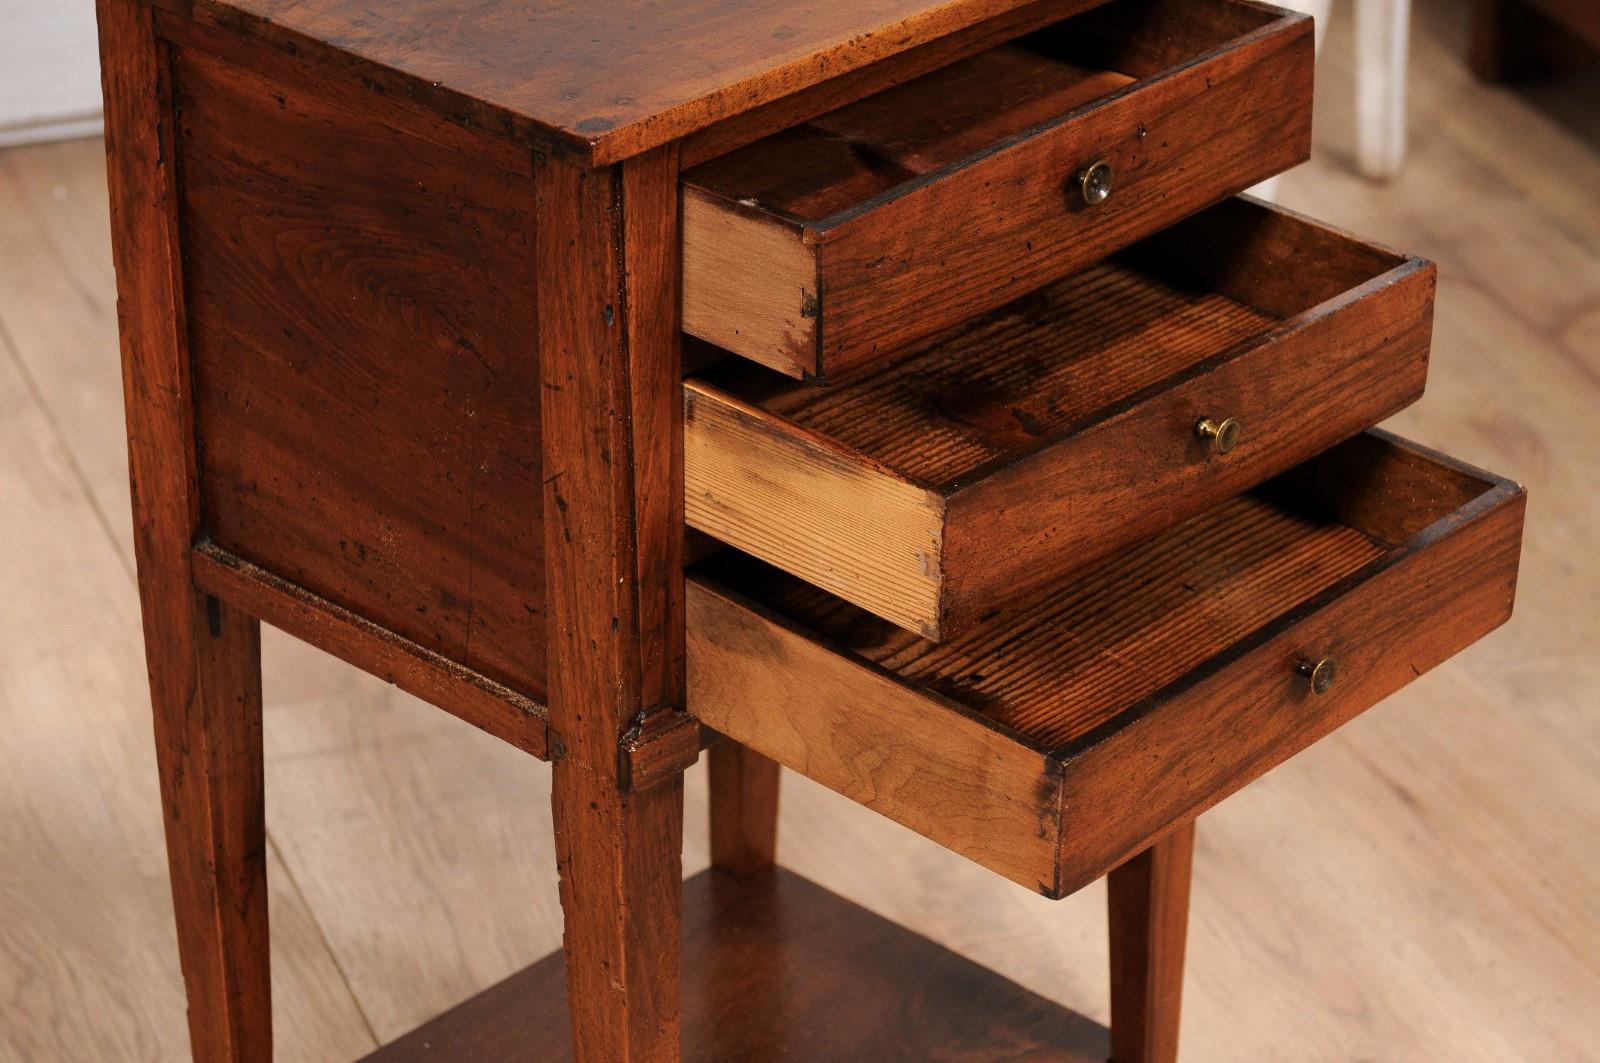 18th Century Italian Walnut Bedside Table with Three Drawers and Tapering Legs For Sale 2